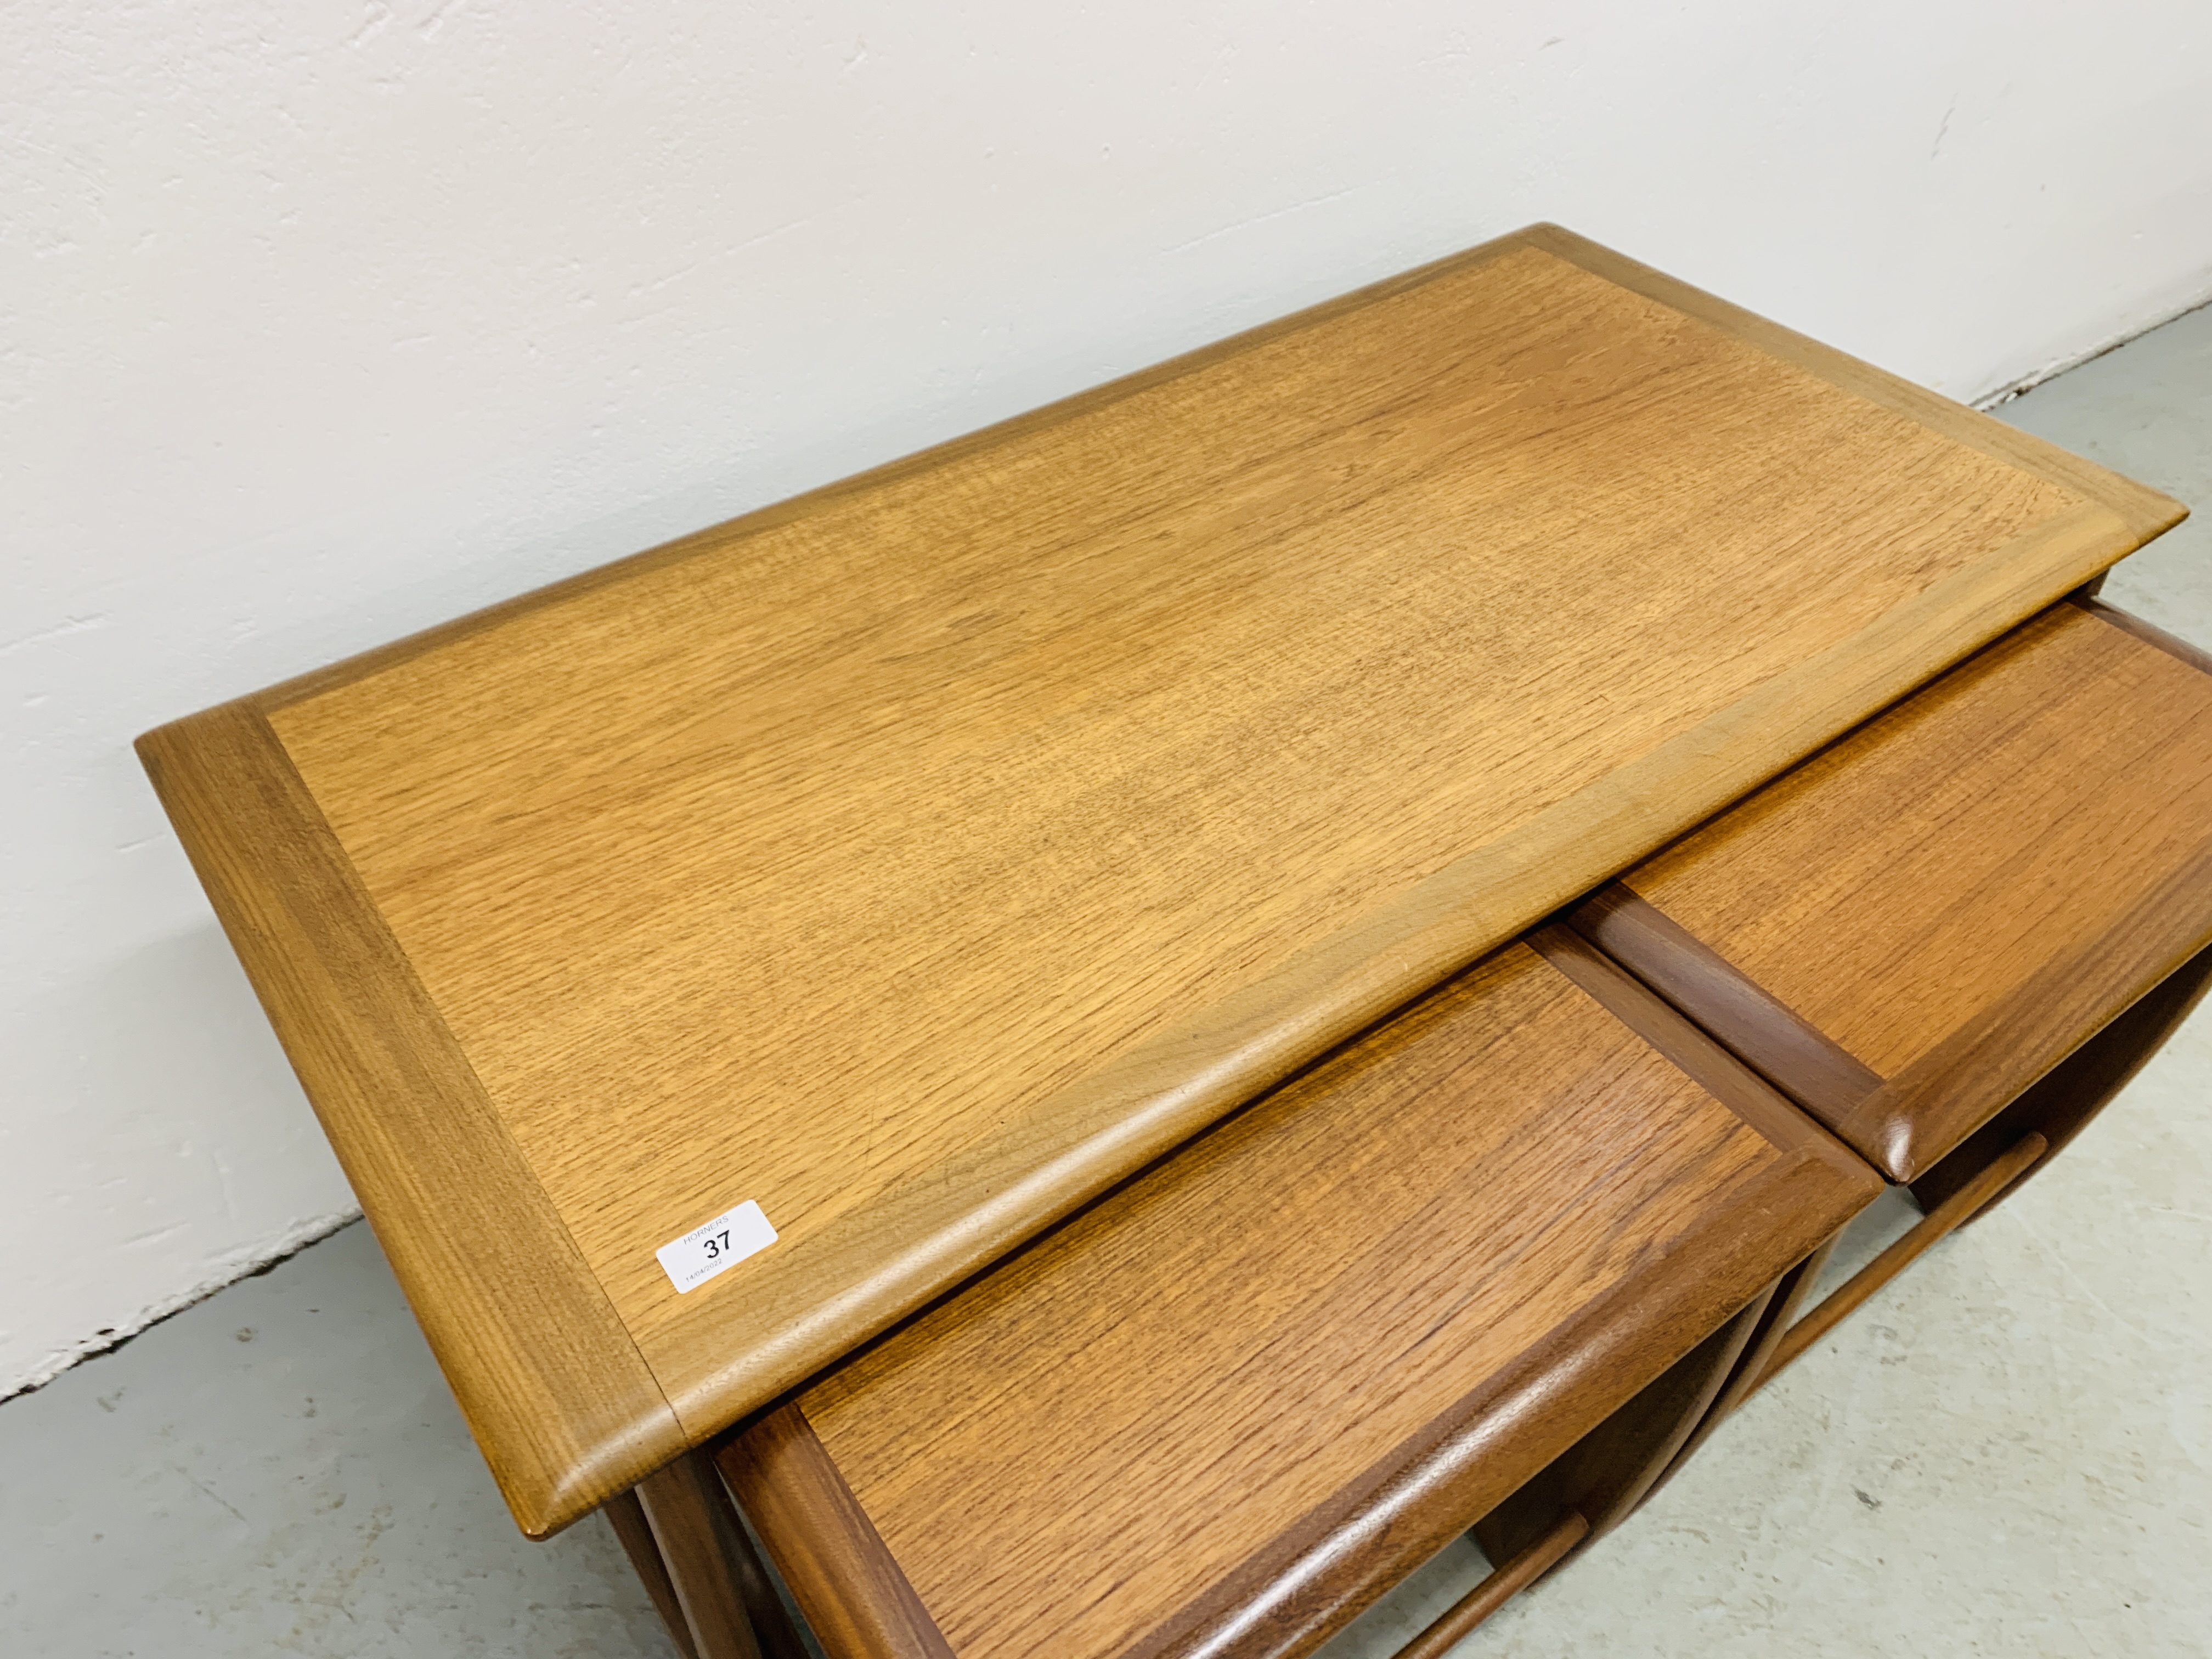 G-PLAN TEAK RECTANGULAR COFFEE TABLE WITH TWO NESTING TABLES BELOW - Image 4 of 12